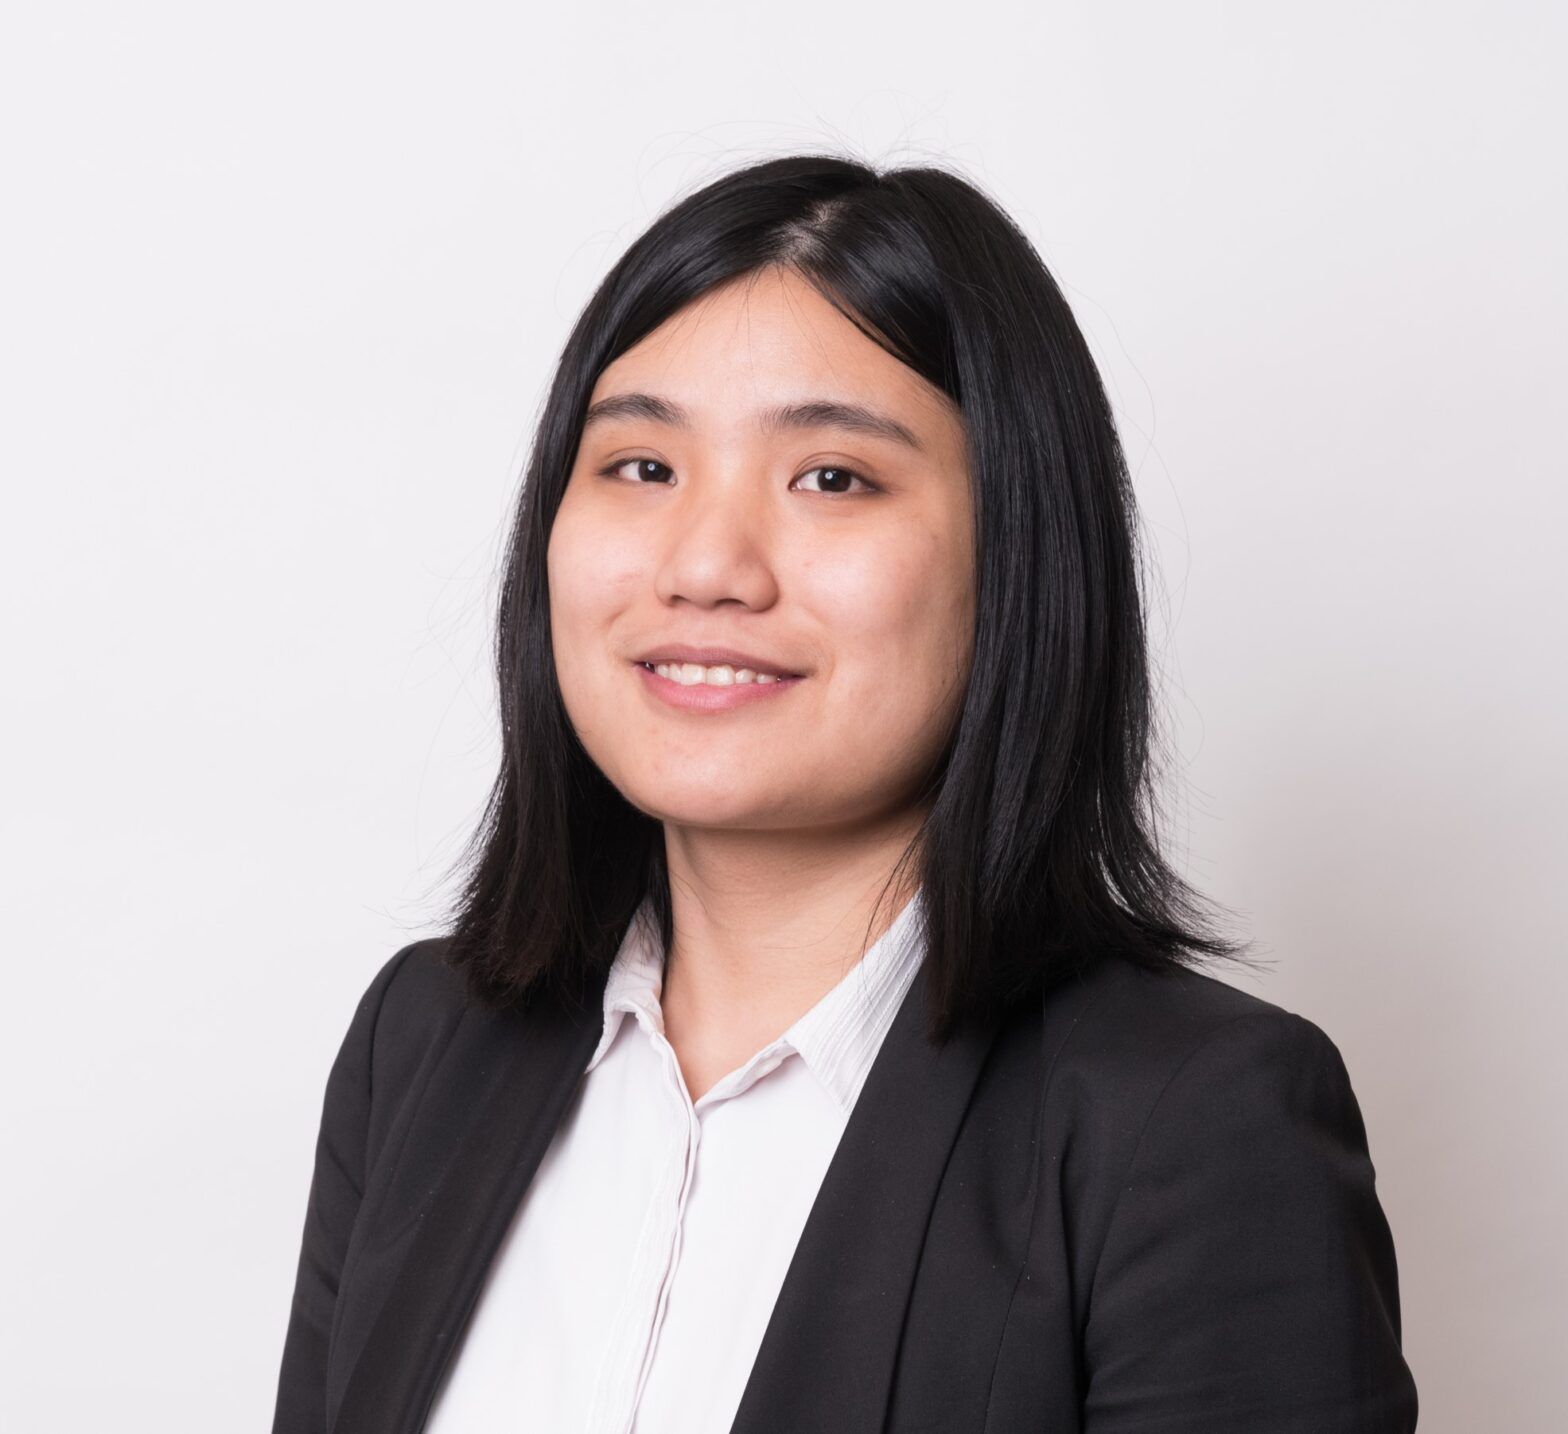 Impax hires head of ESG for Asia-Pacific